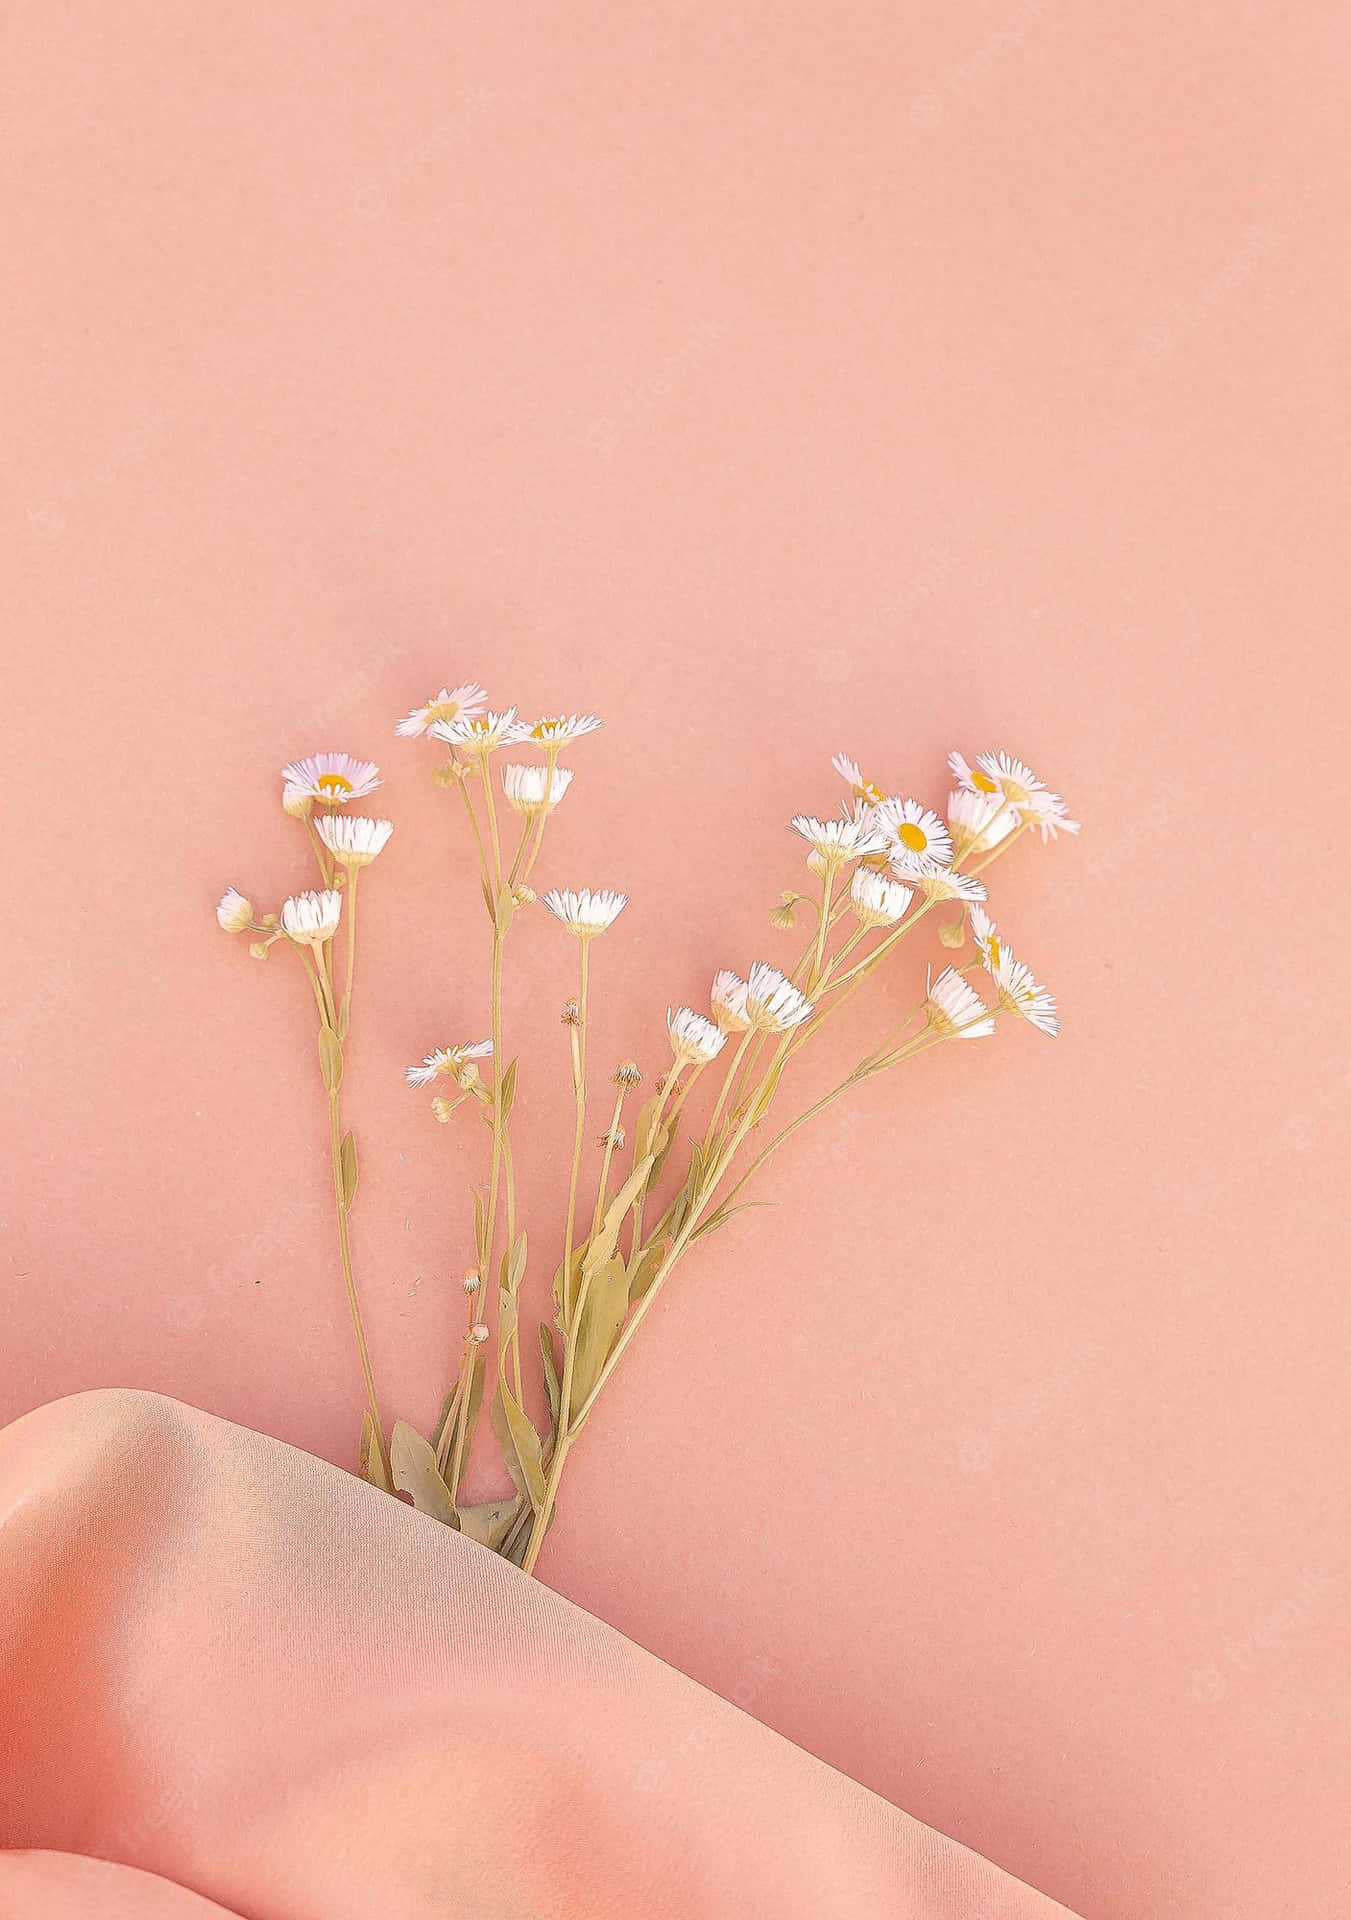 Lille Daisy Blomster Pink Aesthetic Baggrund